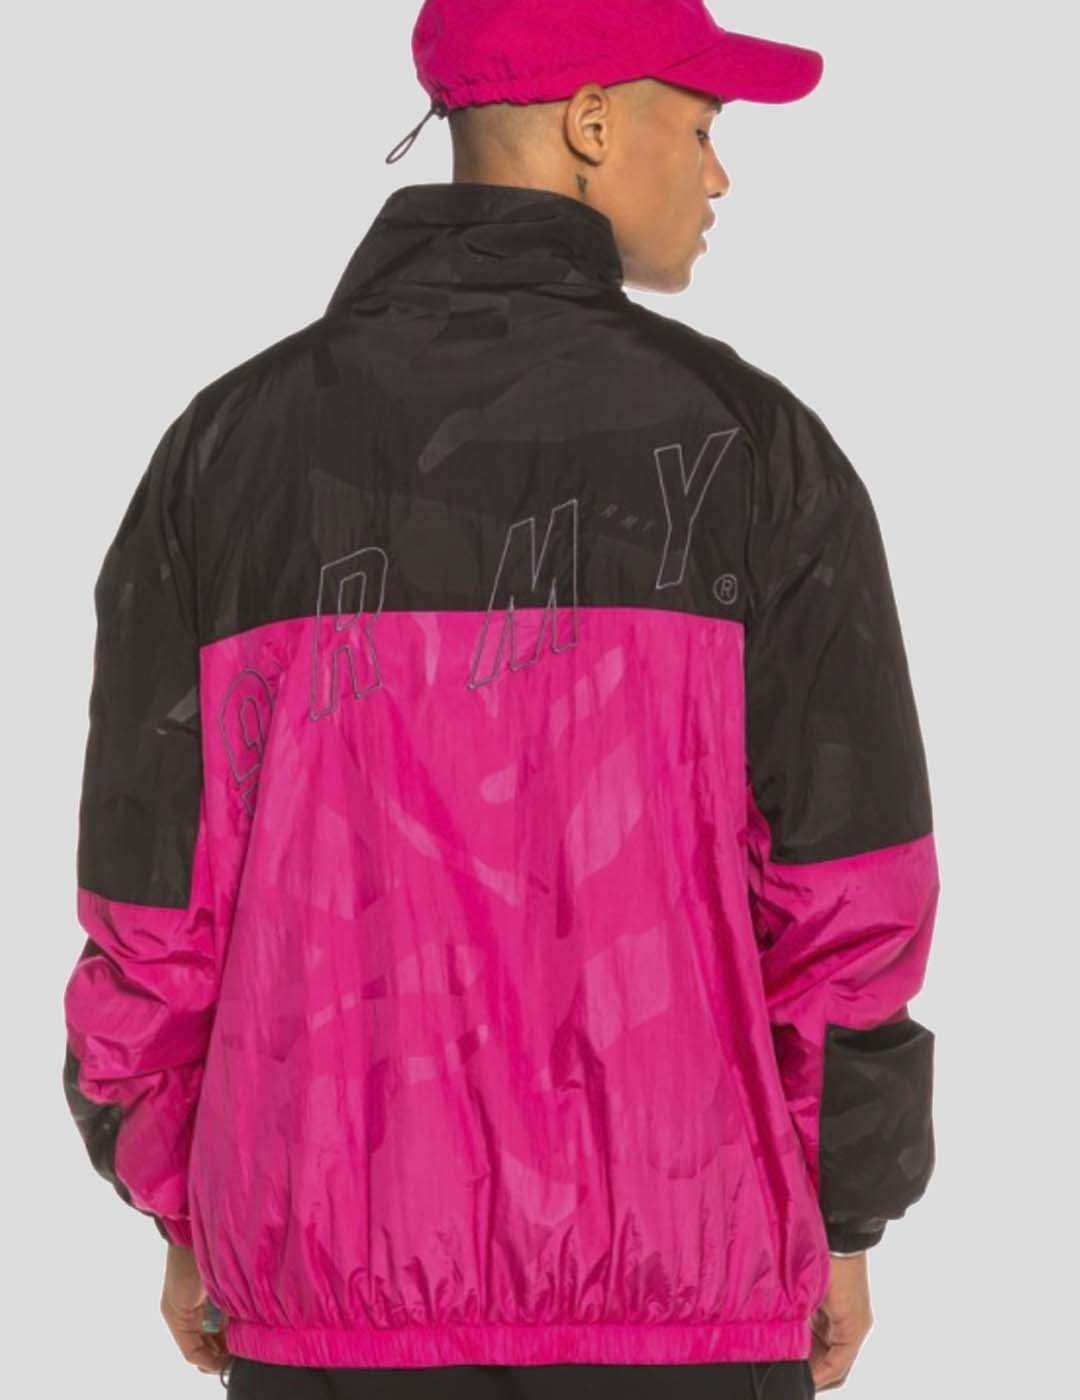 CHAQUETA GRIMEY MYSTERIOUS VIBES TRACK JACKET PINK